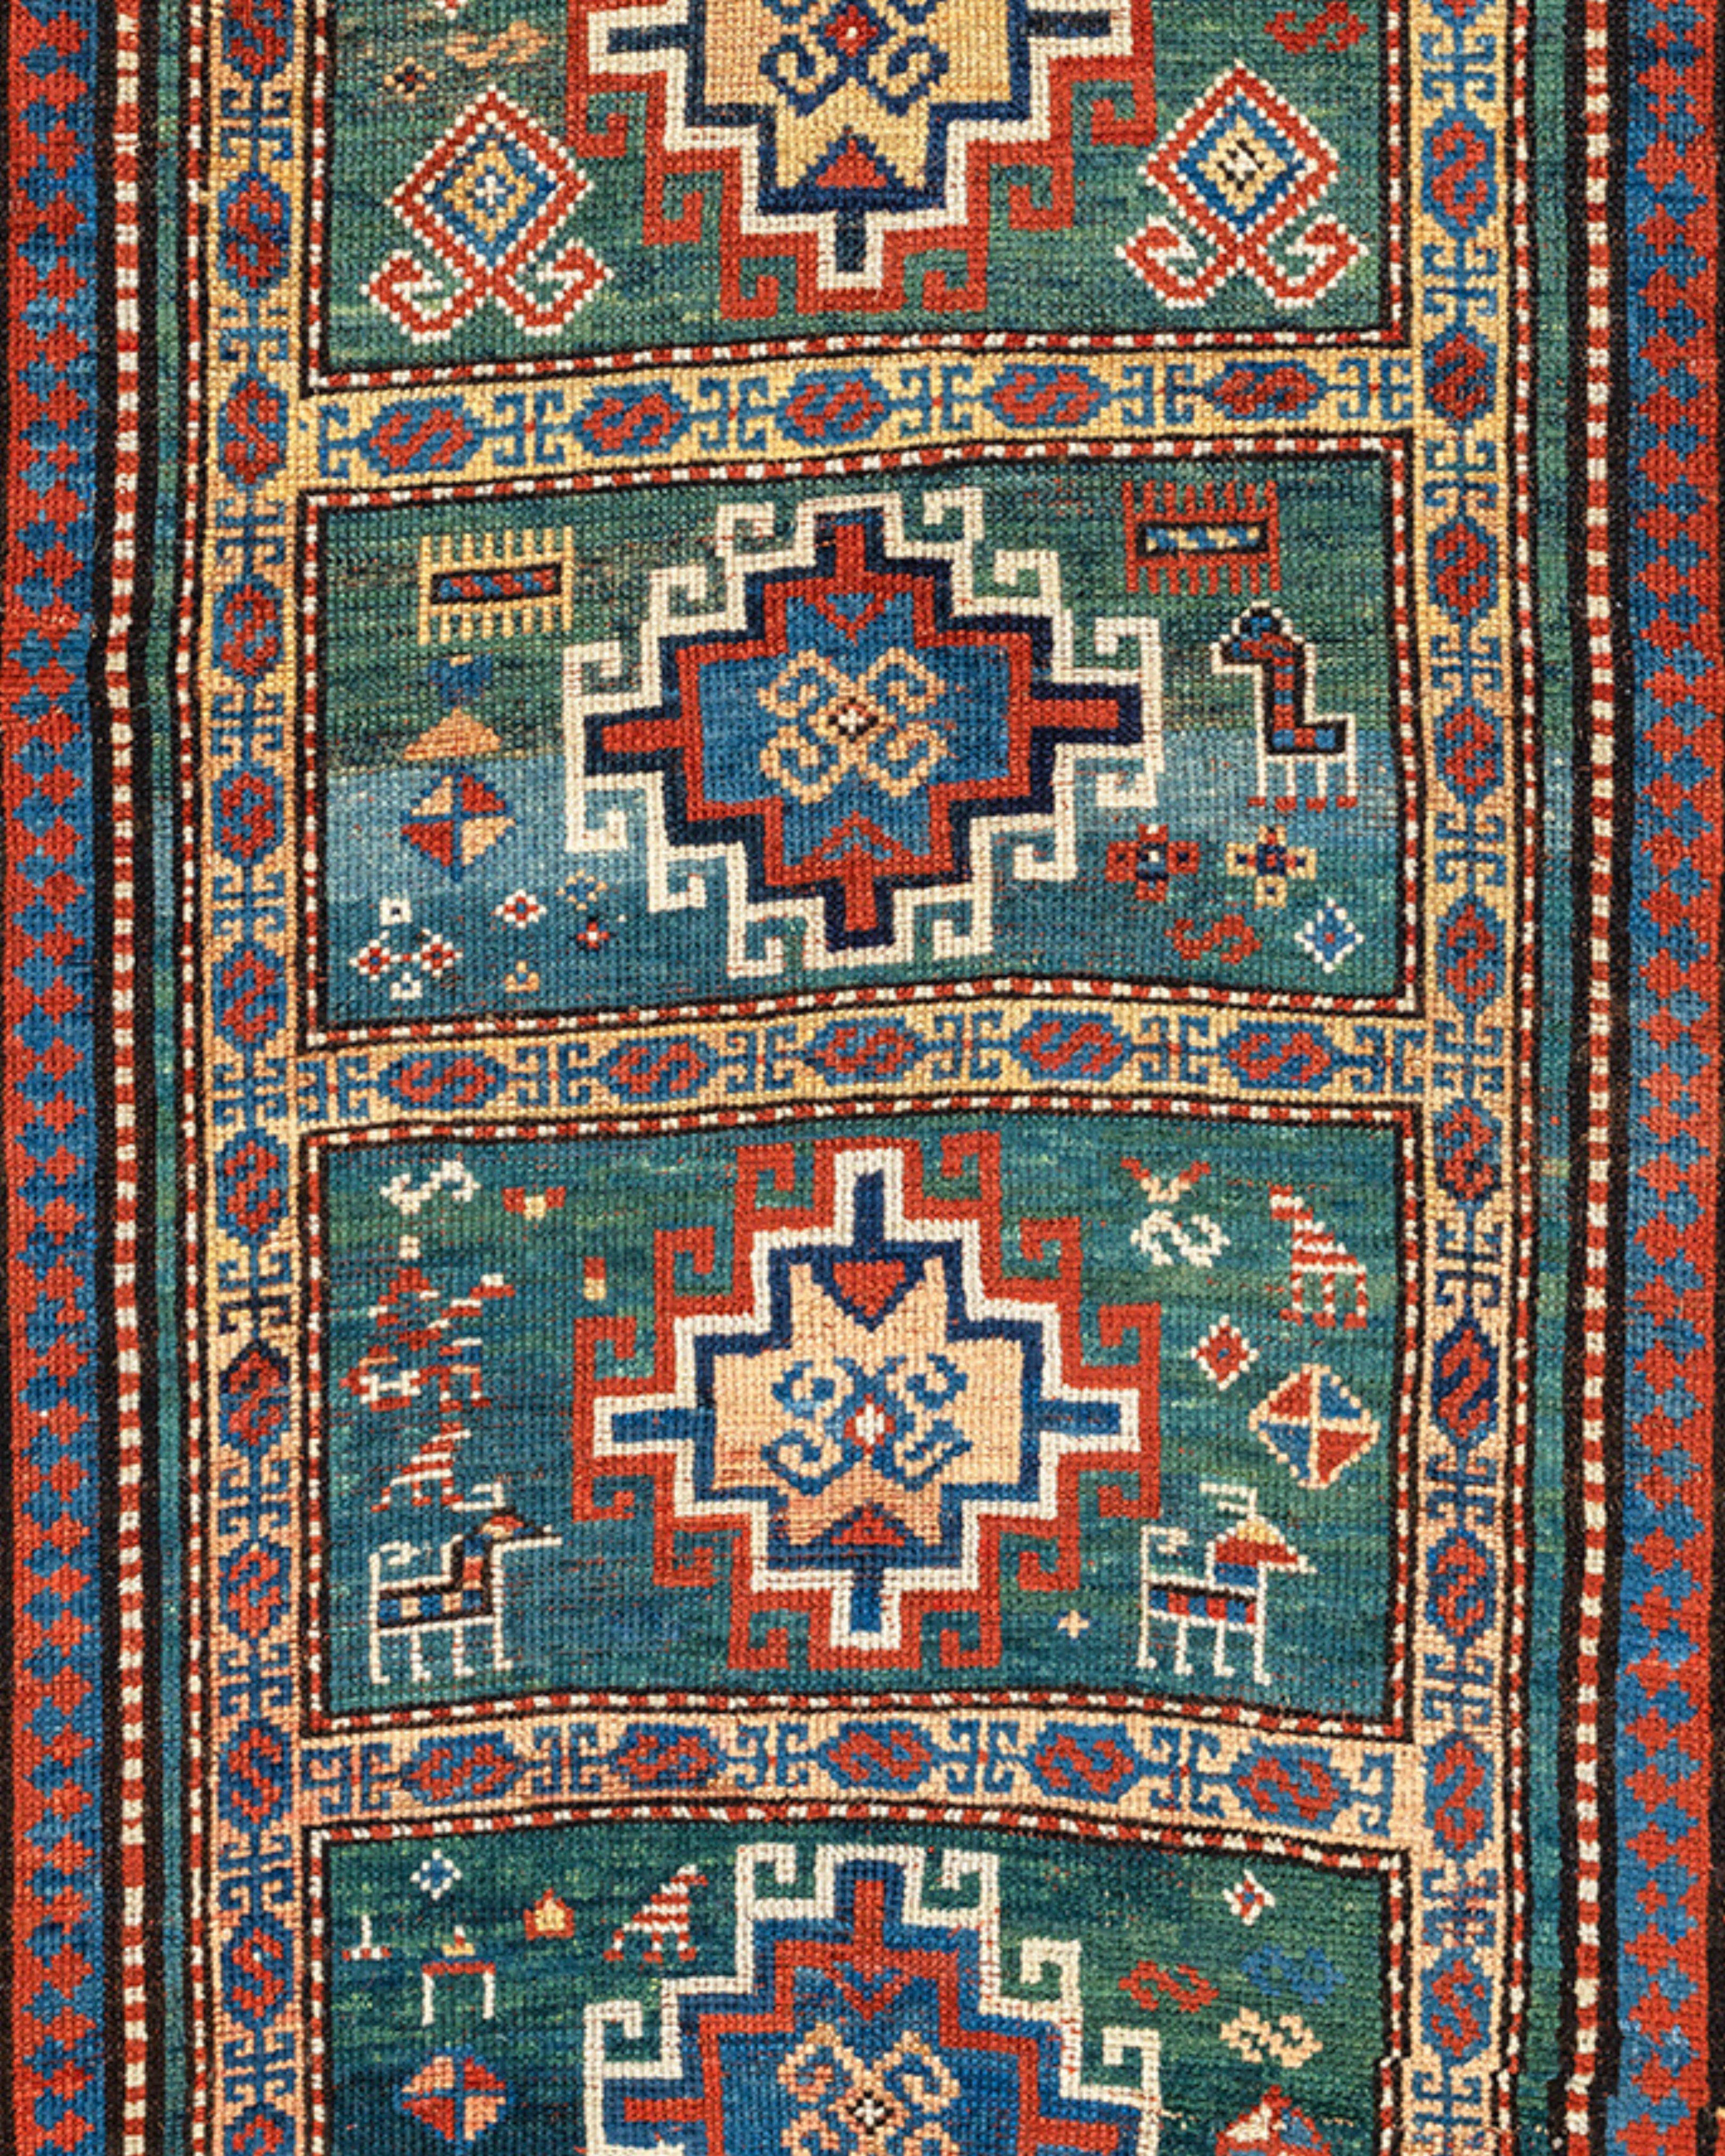 Antique Caucasian Kazak Rug, Late 19th Century

Being sold on behalf of Dr. and Mrs. Timothy McCormack

Additional Information:
Dimensions: 3'11